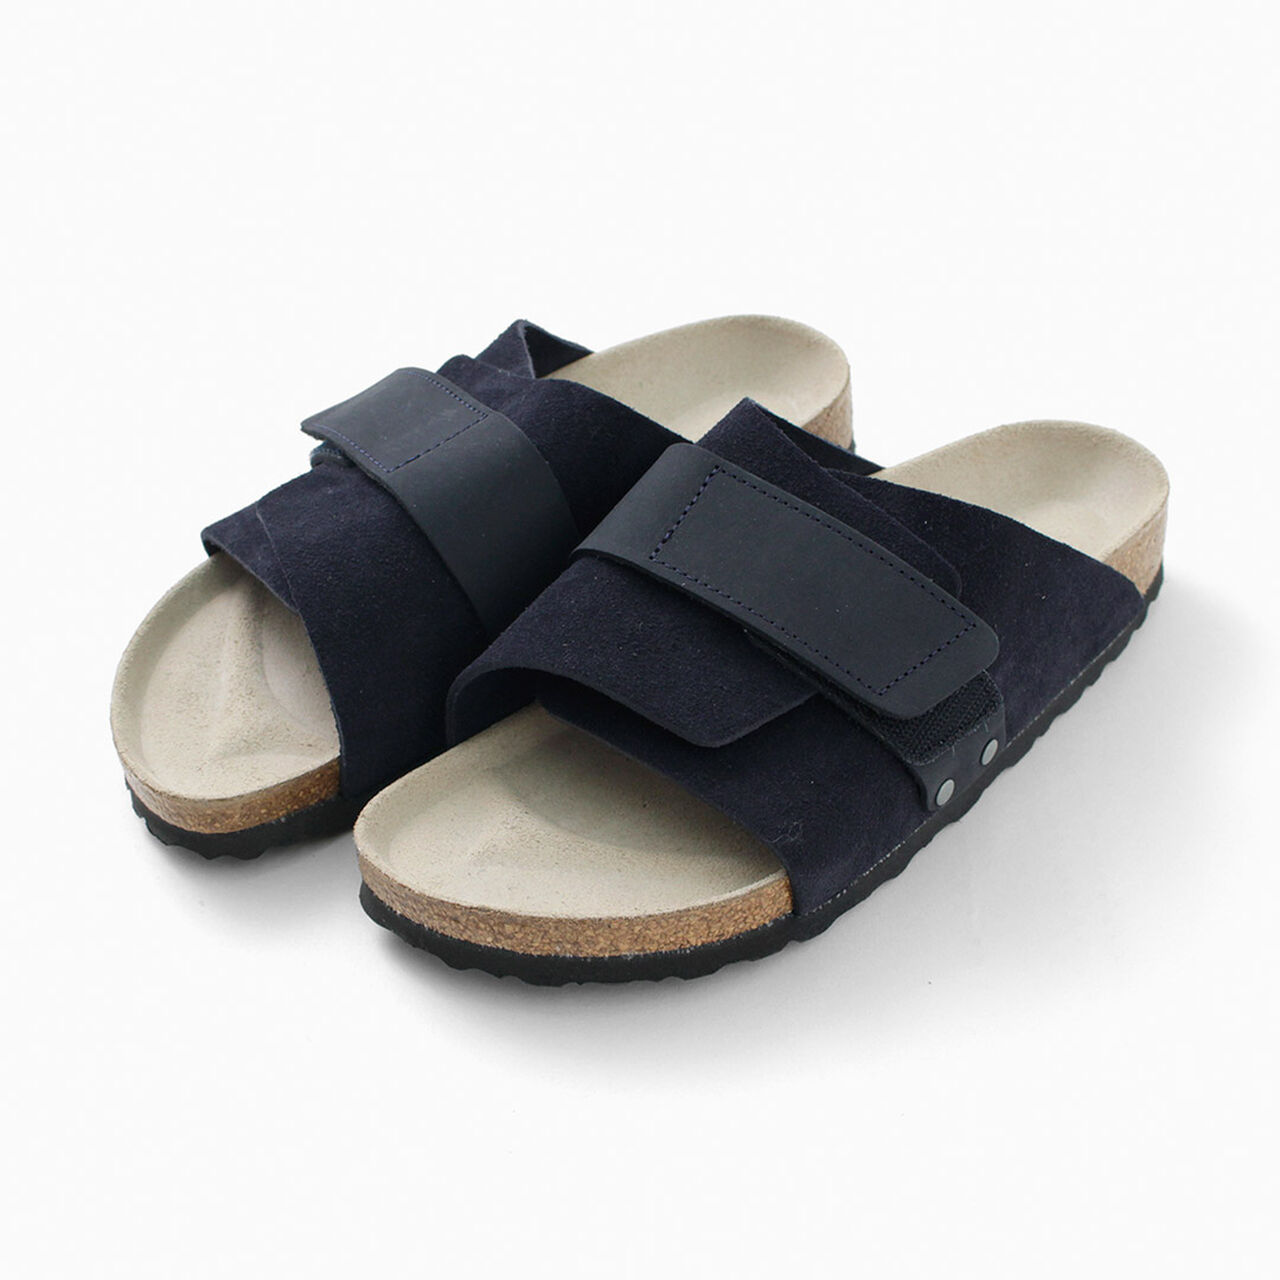 Kyoto Sandals Nubuck Leather Suede,Midnight, large image number 0